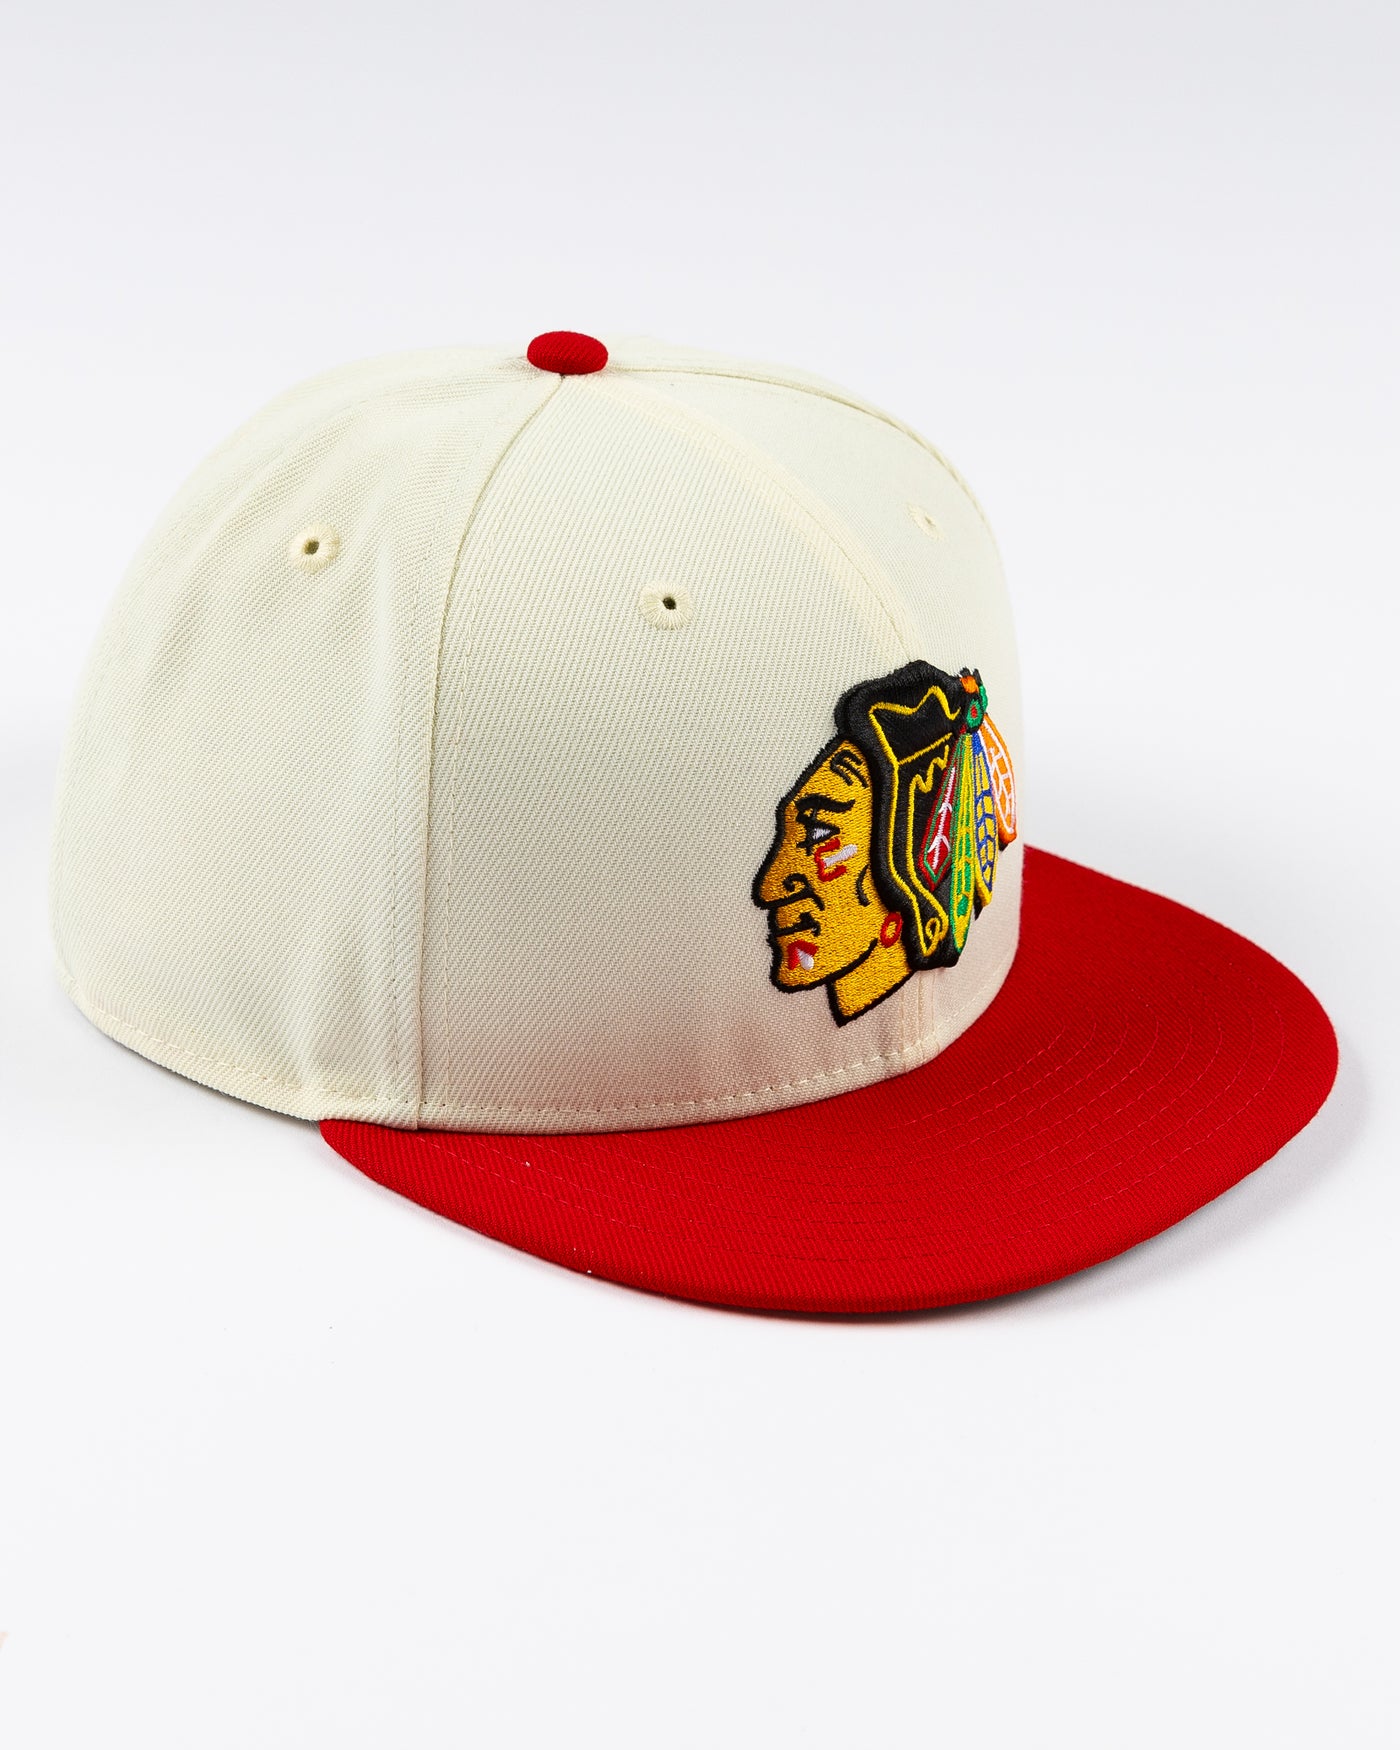 cream and red two tone fitted New Era 59FIFTY cap with embroidered Chicago Blackhawks primary logo on front - right angle lay flat